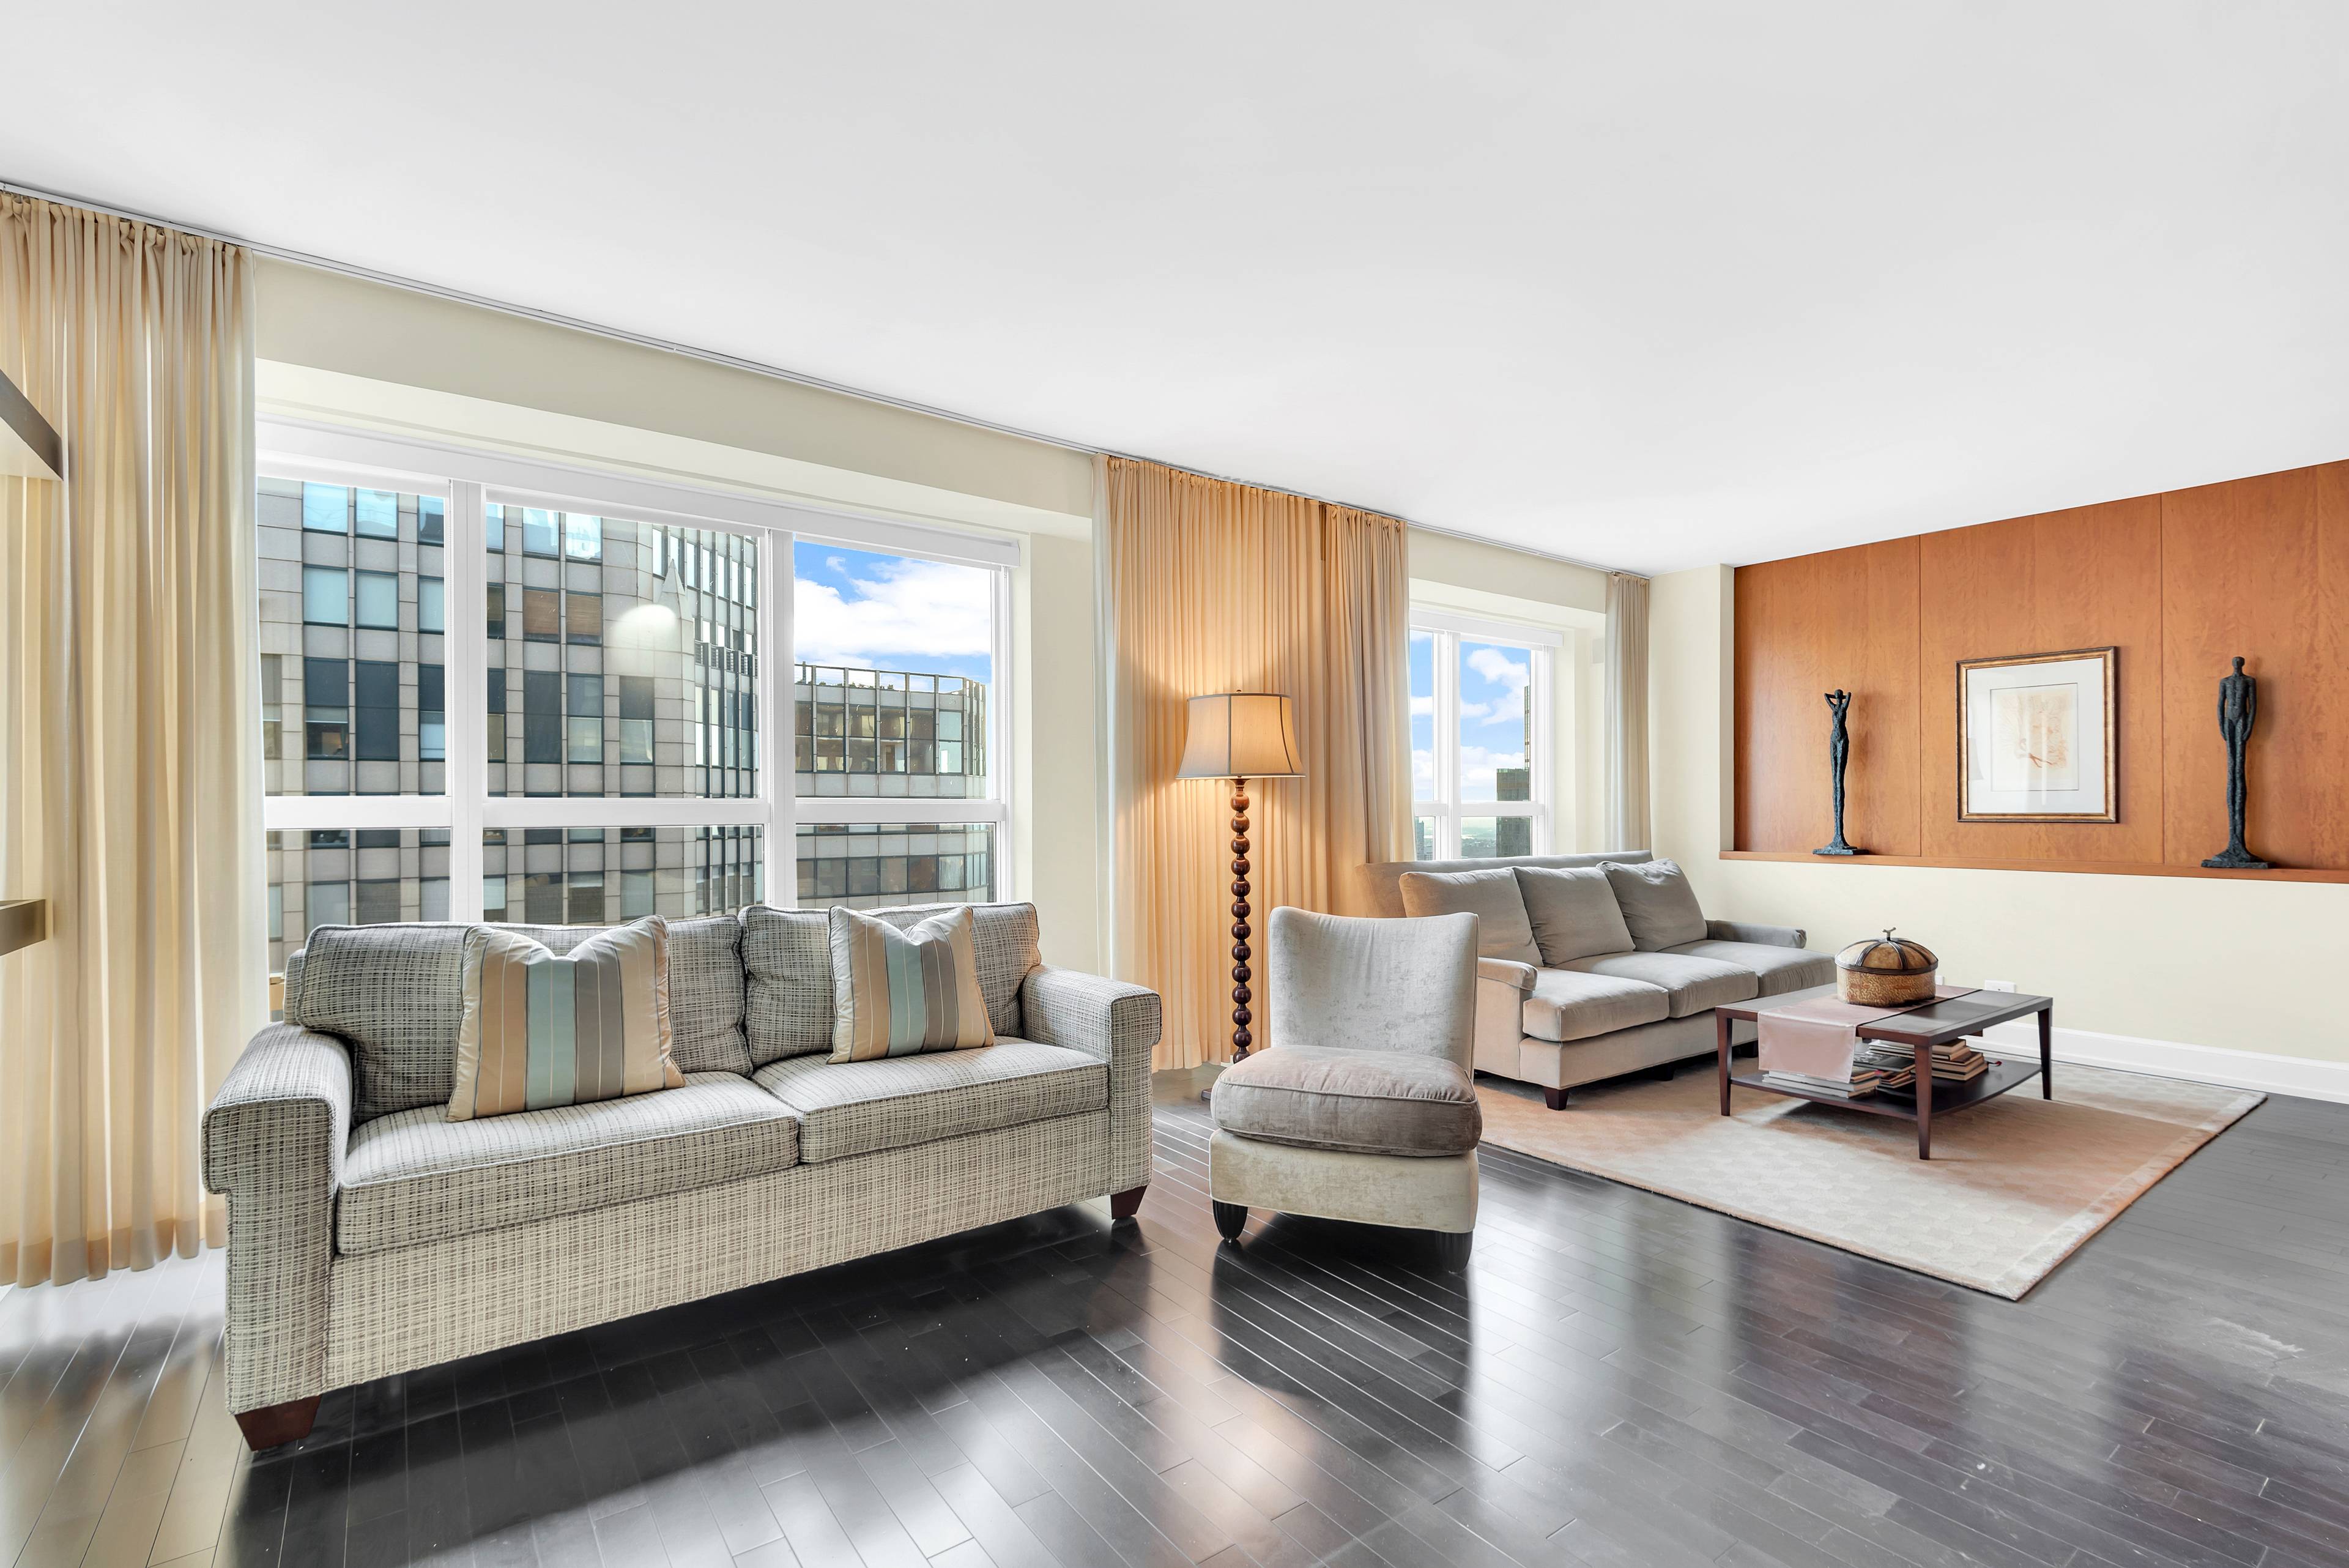 Sunny Southern skyline views from this impeccably designed duplex at the Metropolitan Tower condominium.